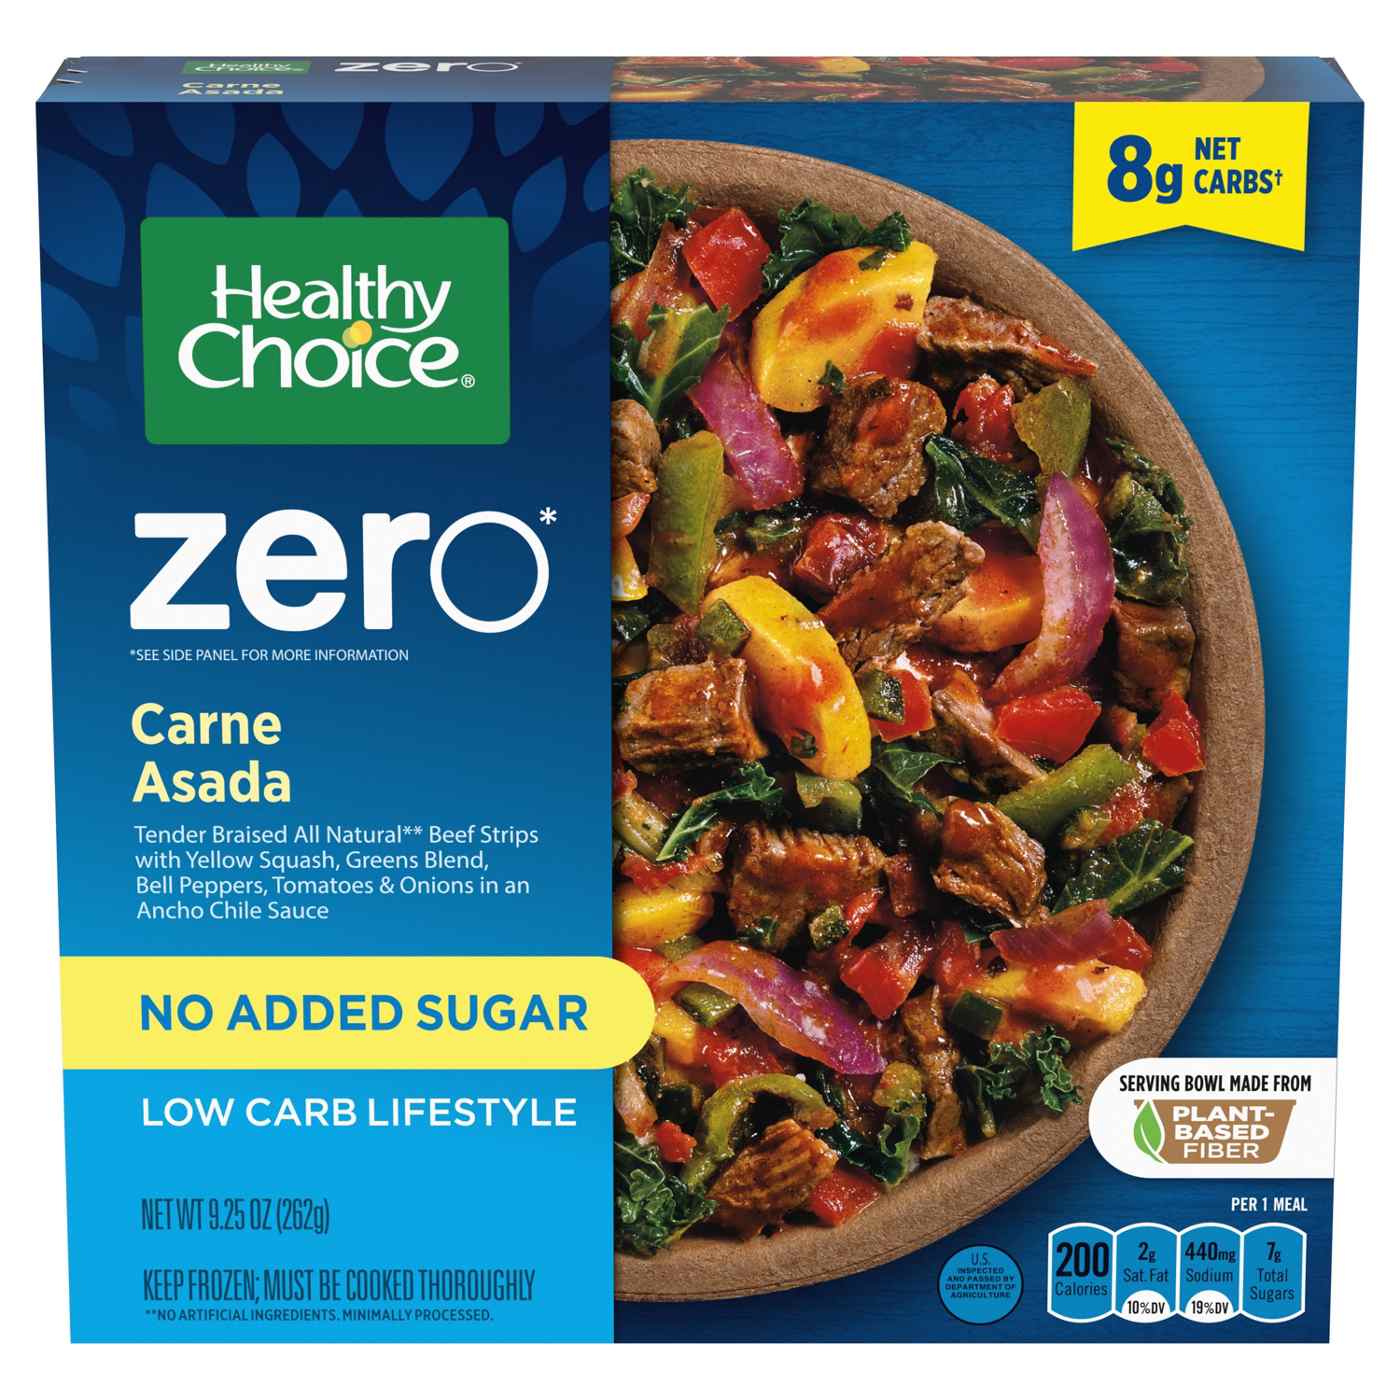 Healthy Choice Zero Low Carb Lifestyle Carne Asada Frozen Meal; image 1 of 7